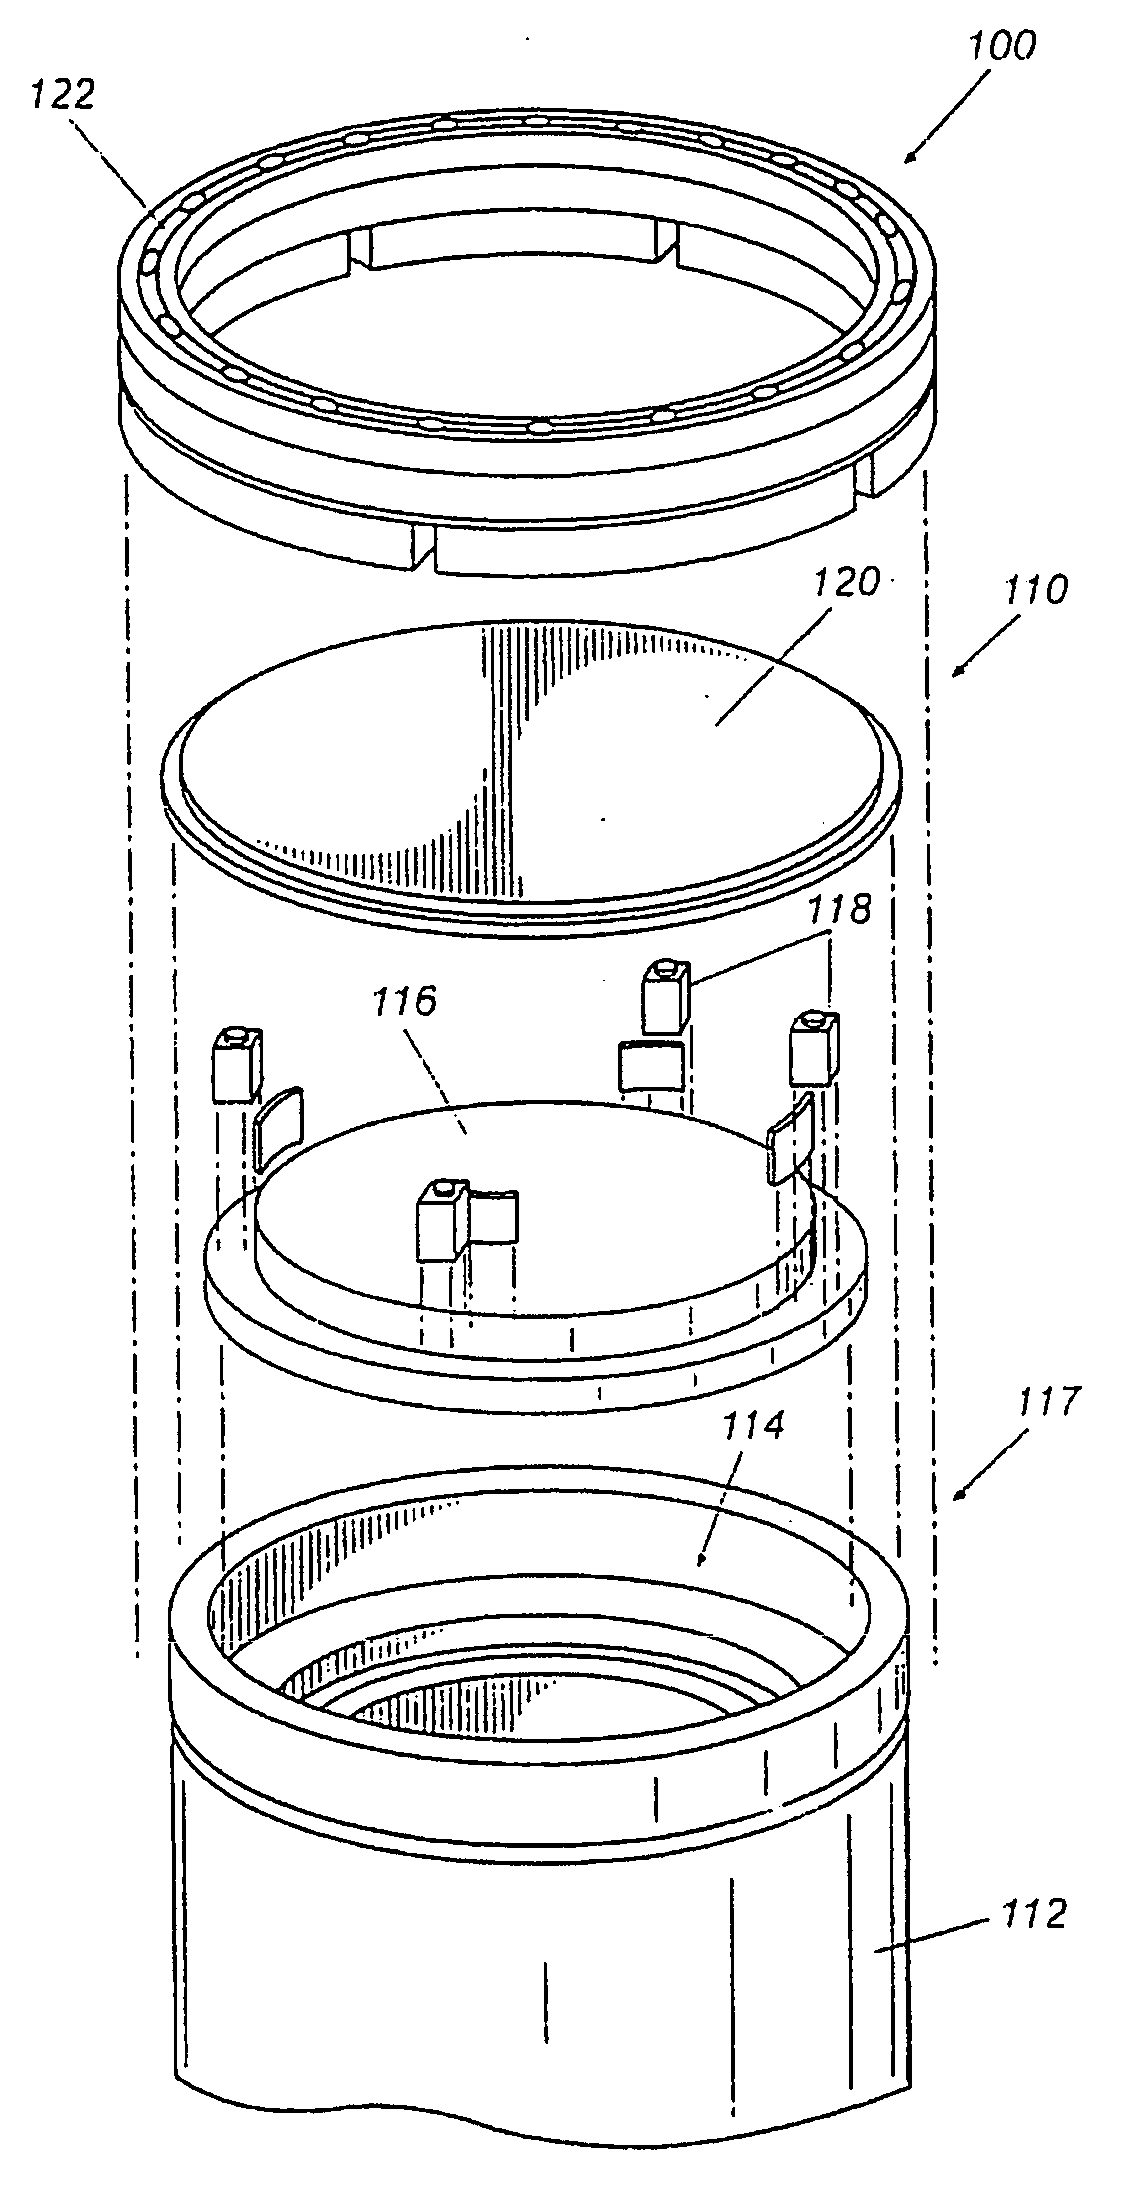 Methods for transporting and canistering nuclear spent fuel